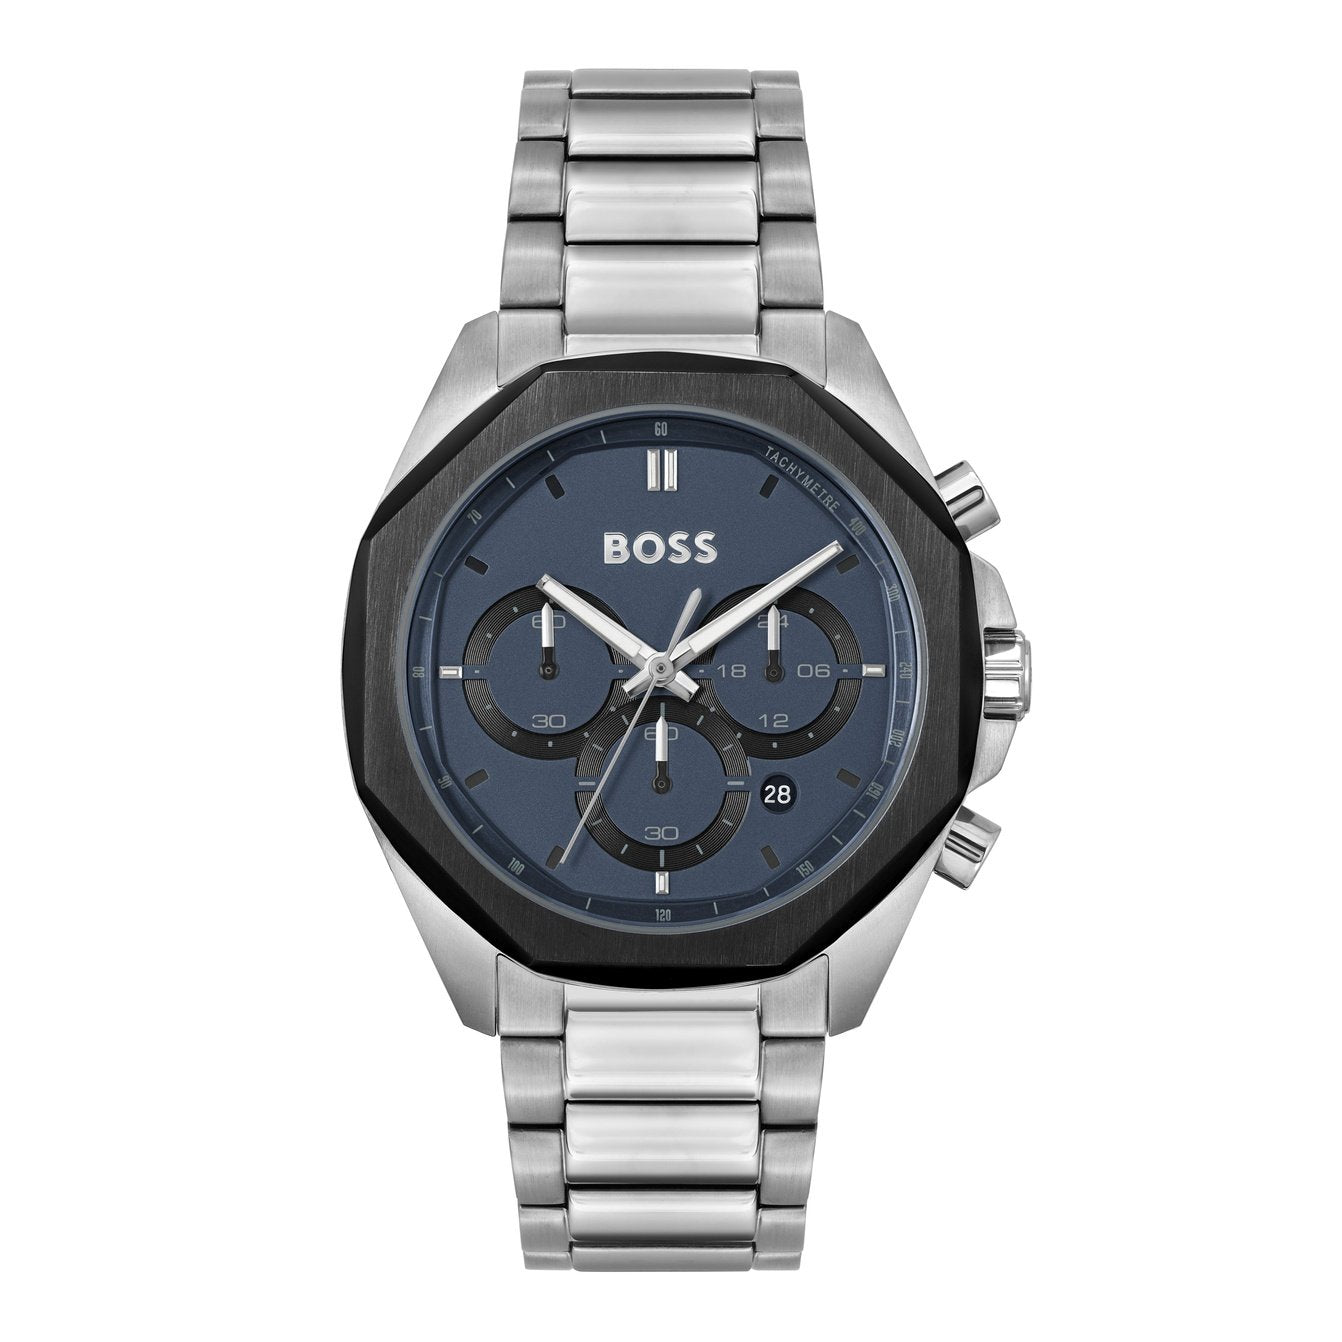 HUGO BOSS Watches For Page Online And – Now Women | Men Shop 3